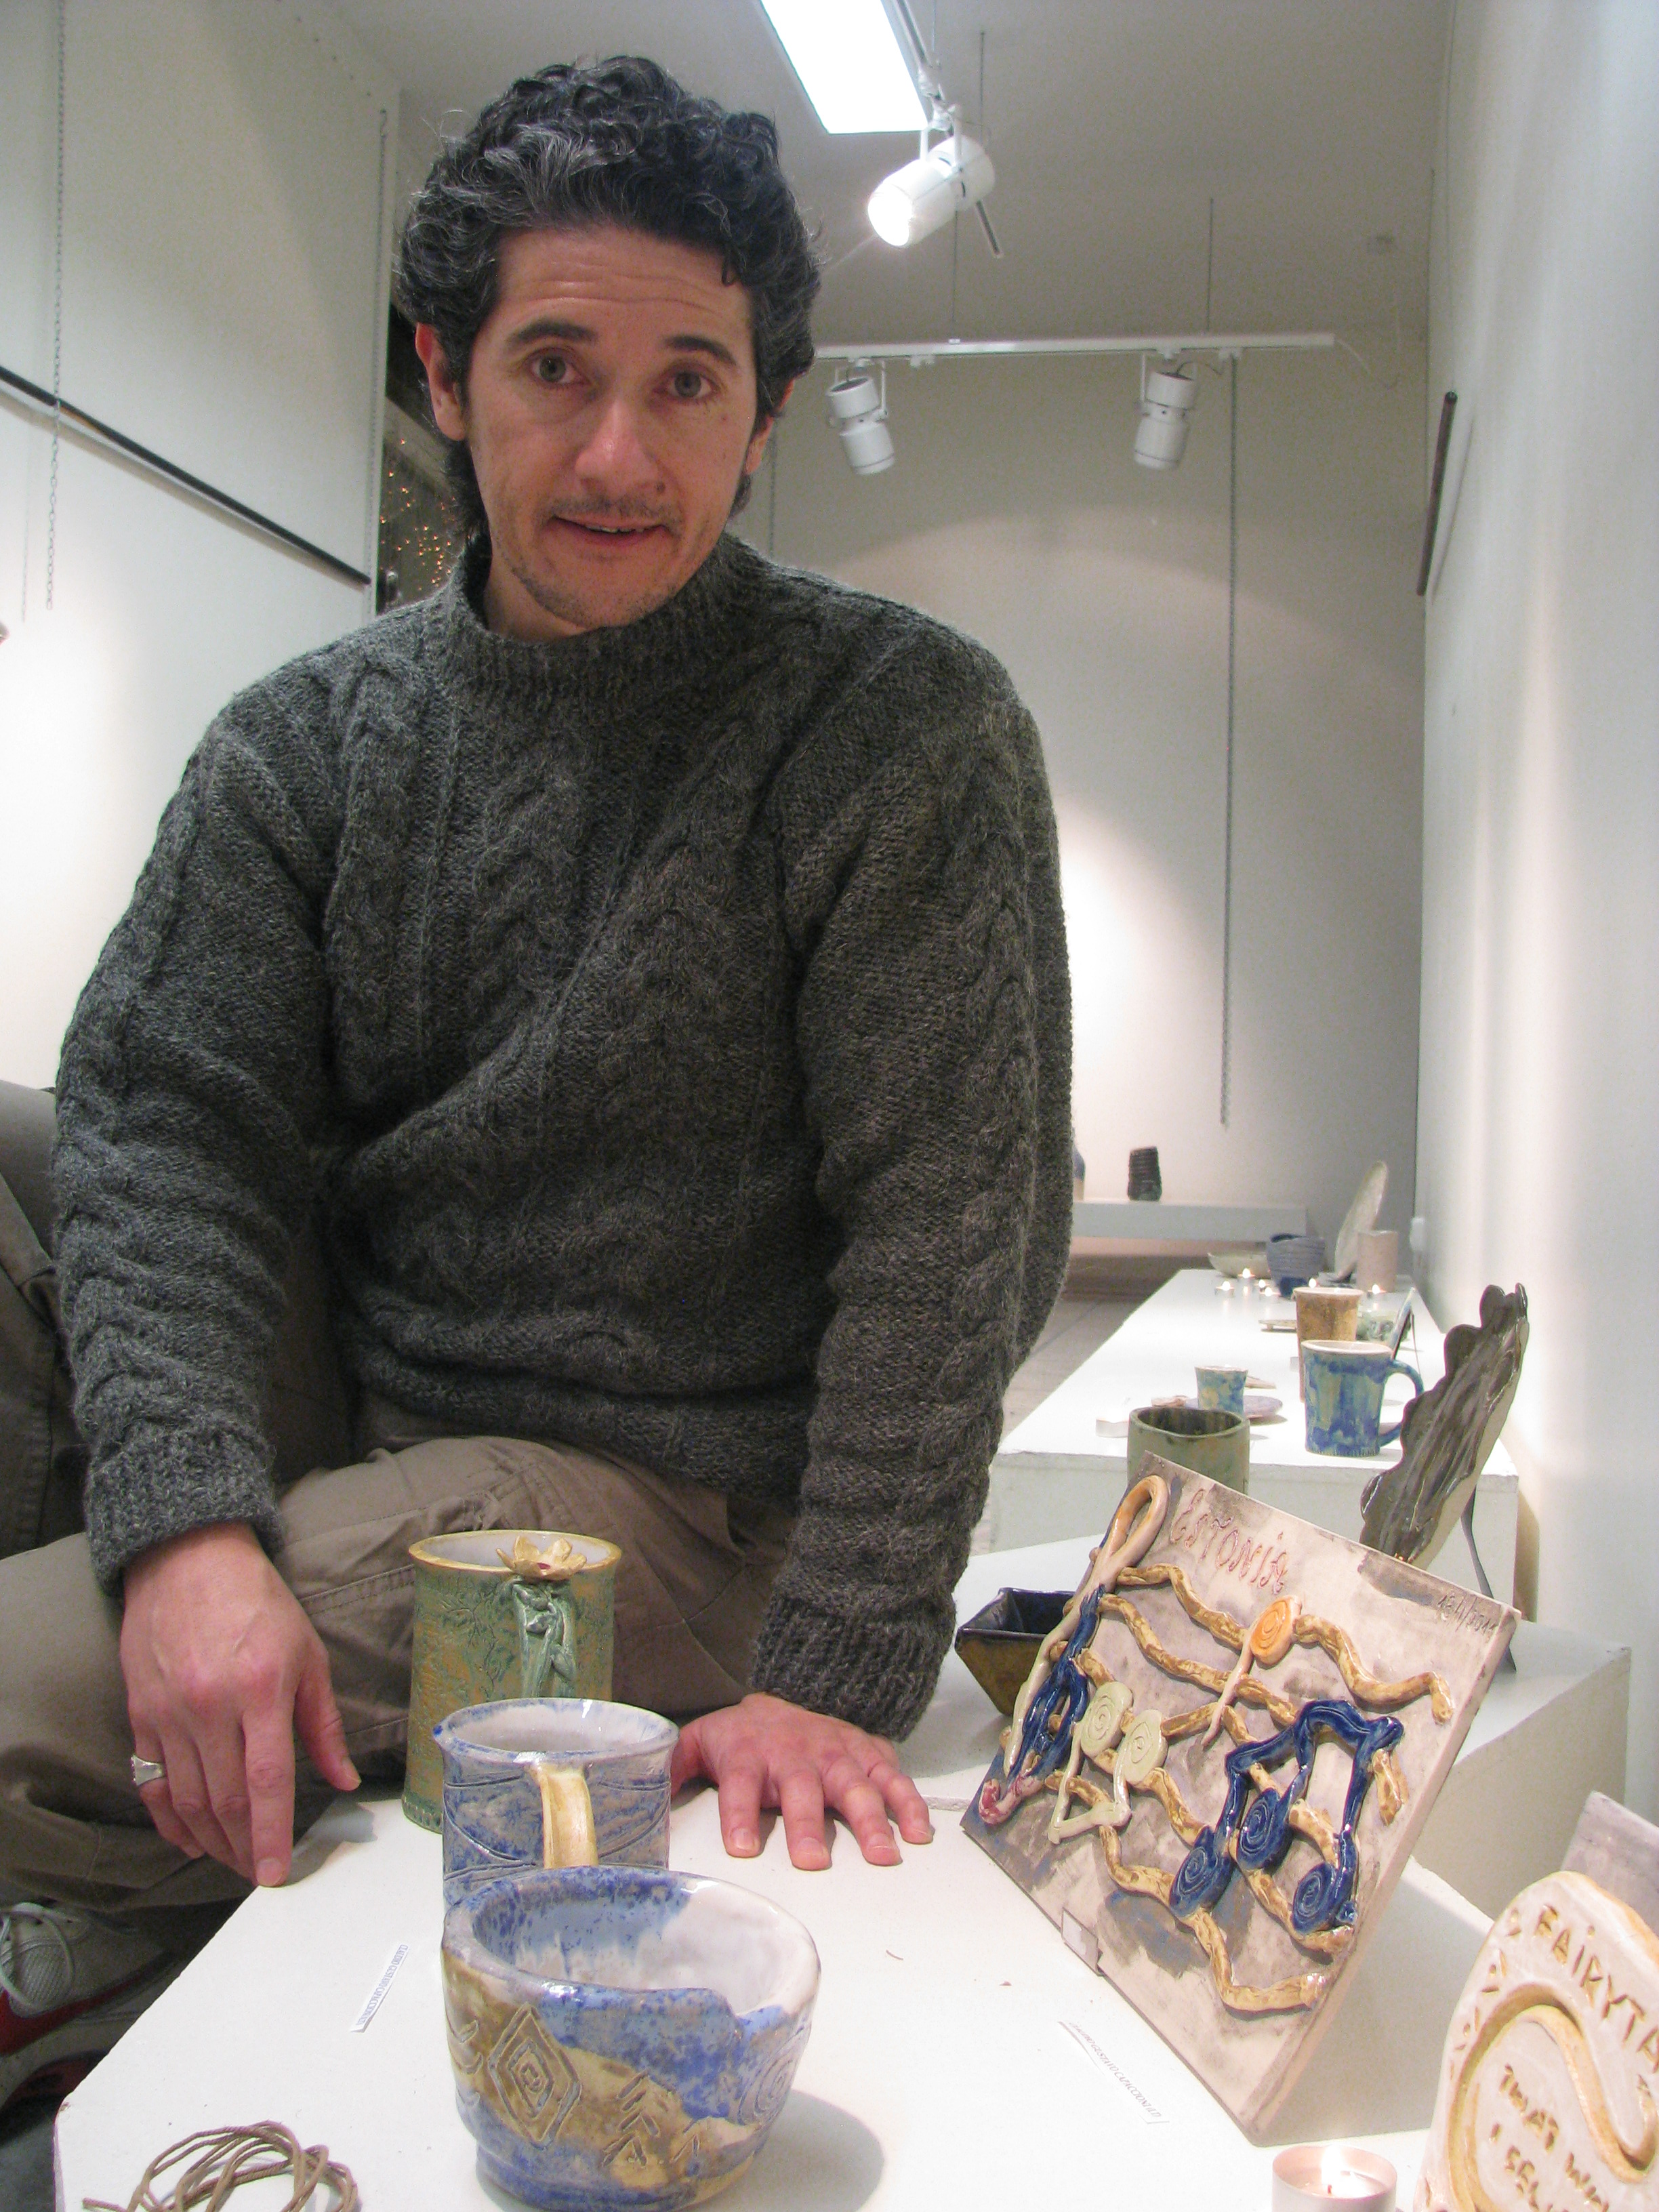 Gustavo with his works